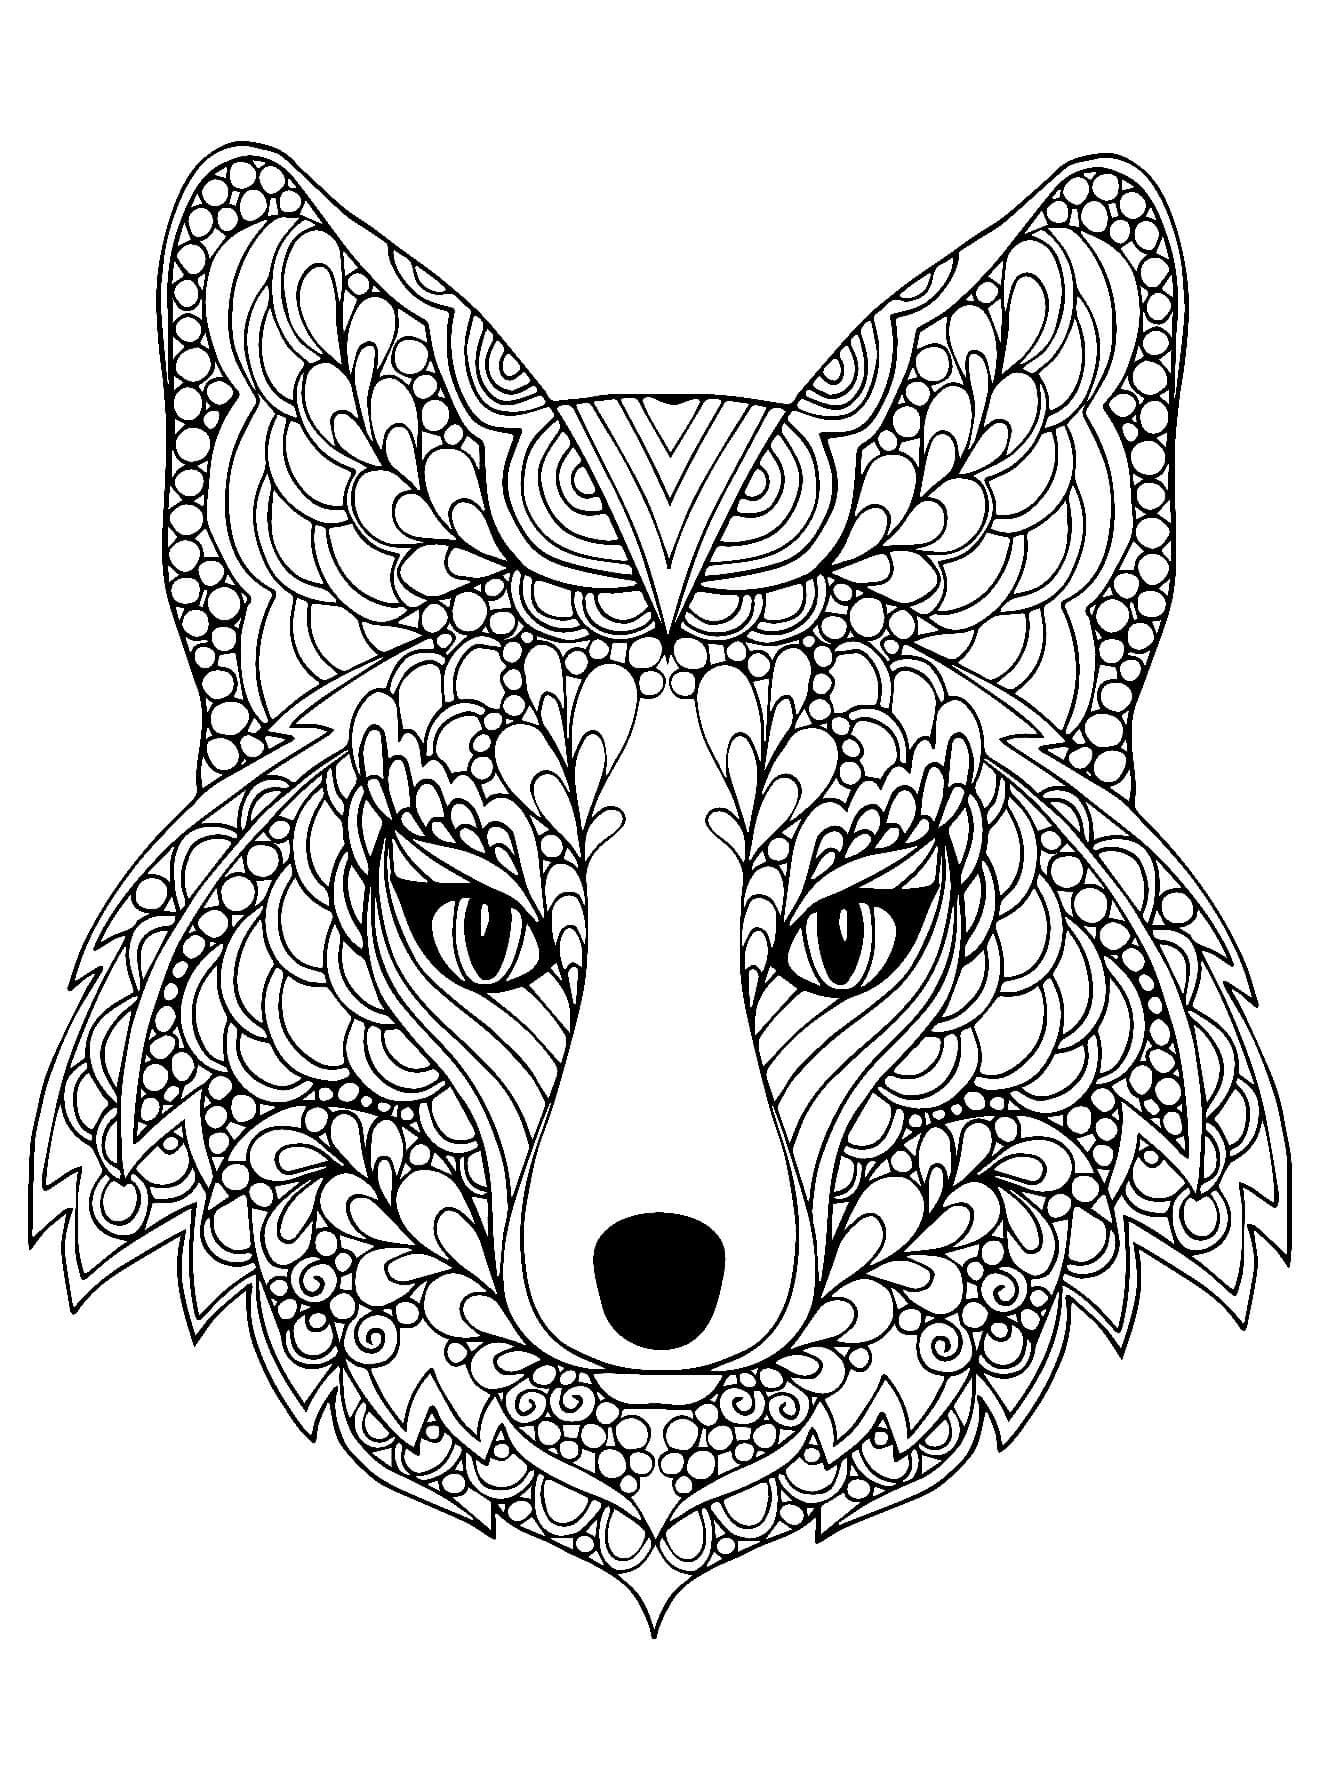 Hard Animal Coloring Pages Coloring Ideas 70096d8239be50c8fd1291f7d8288857coloring Pages For